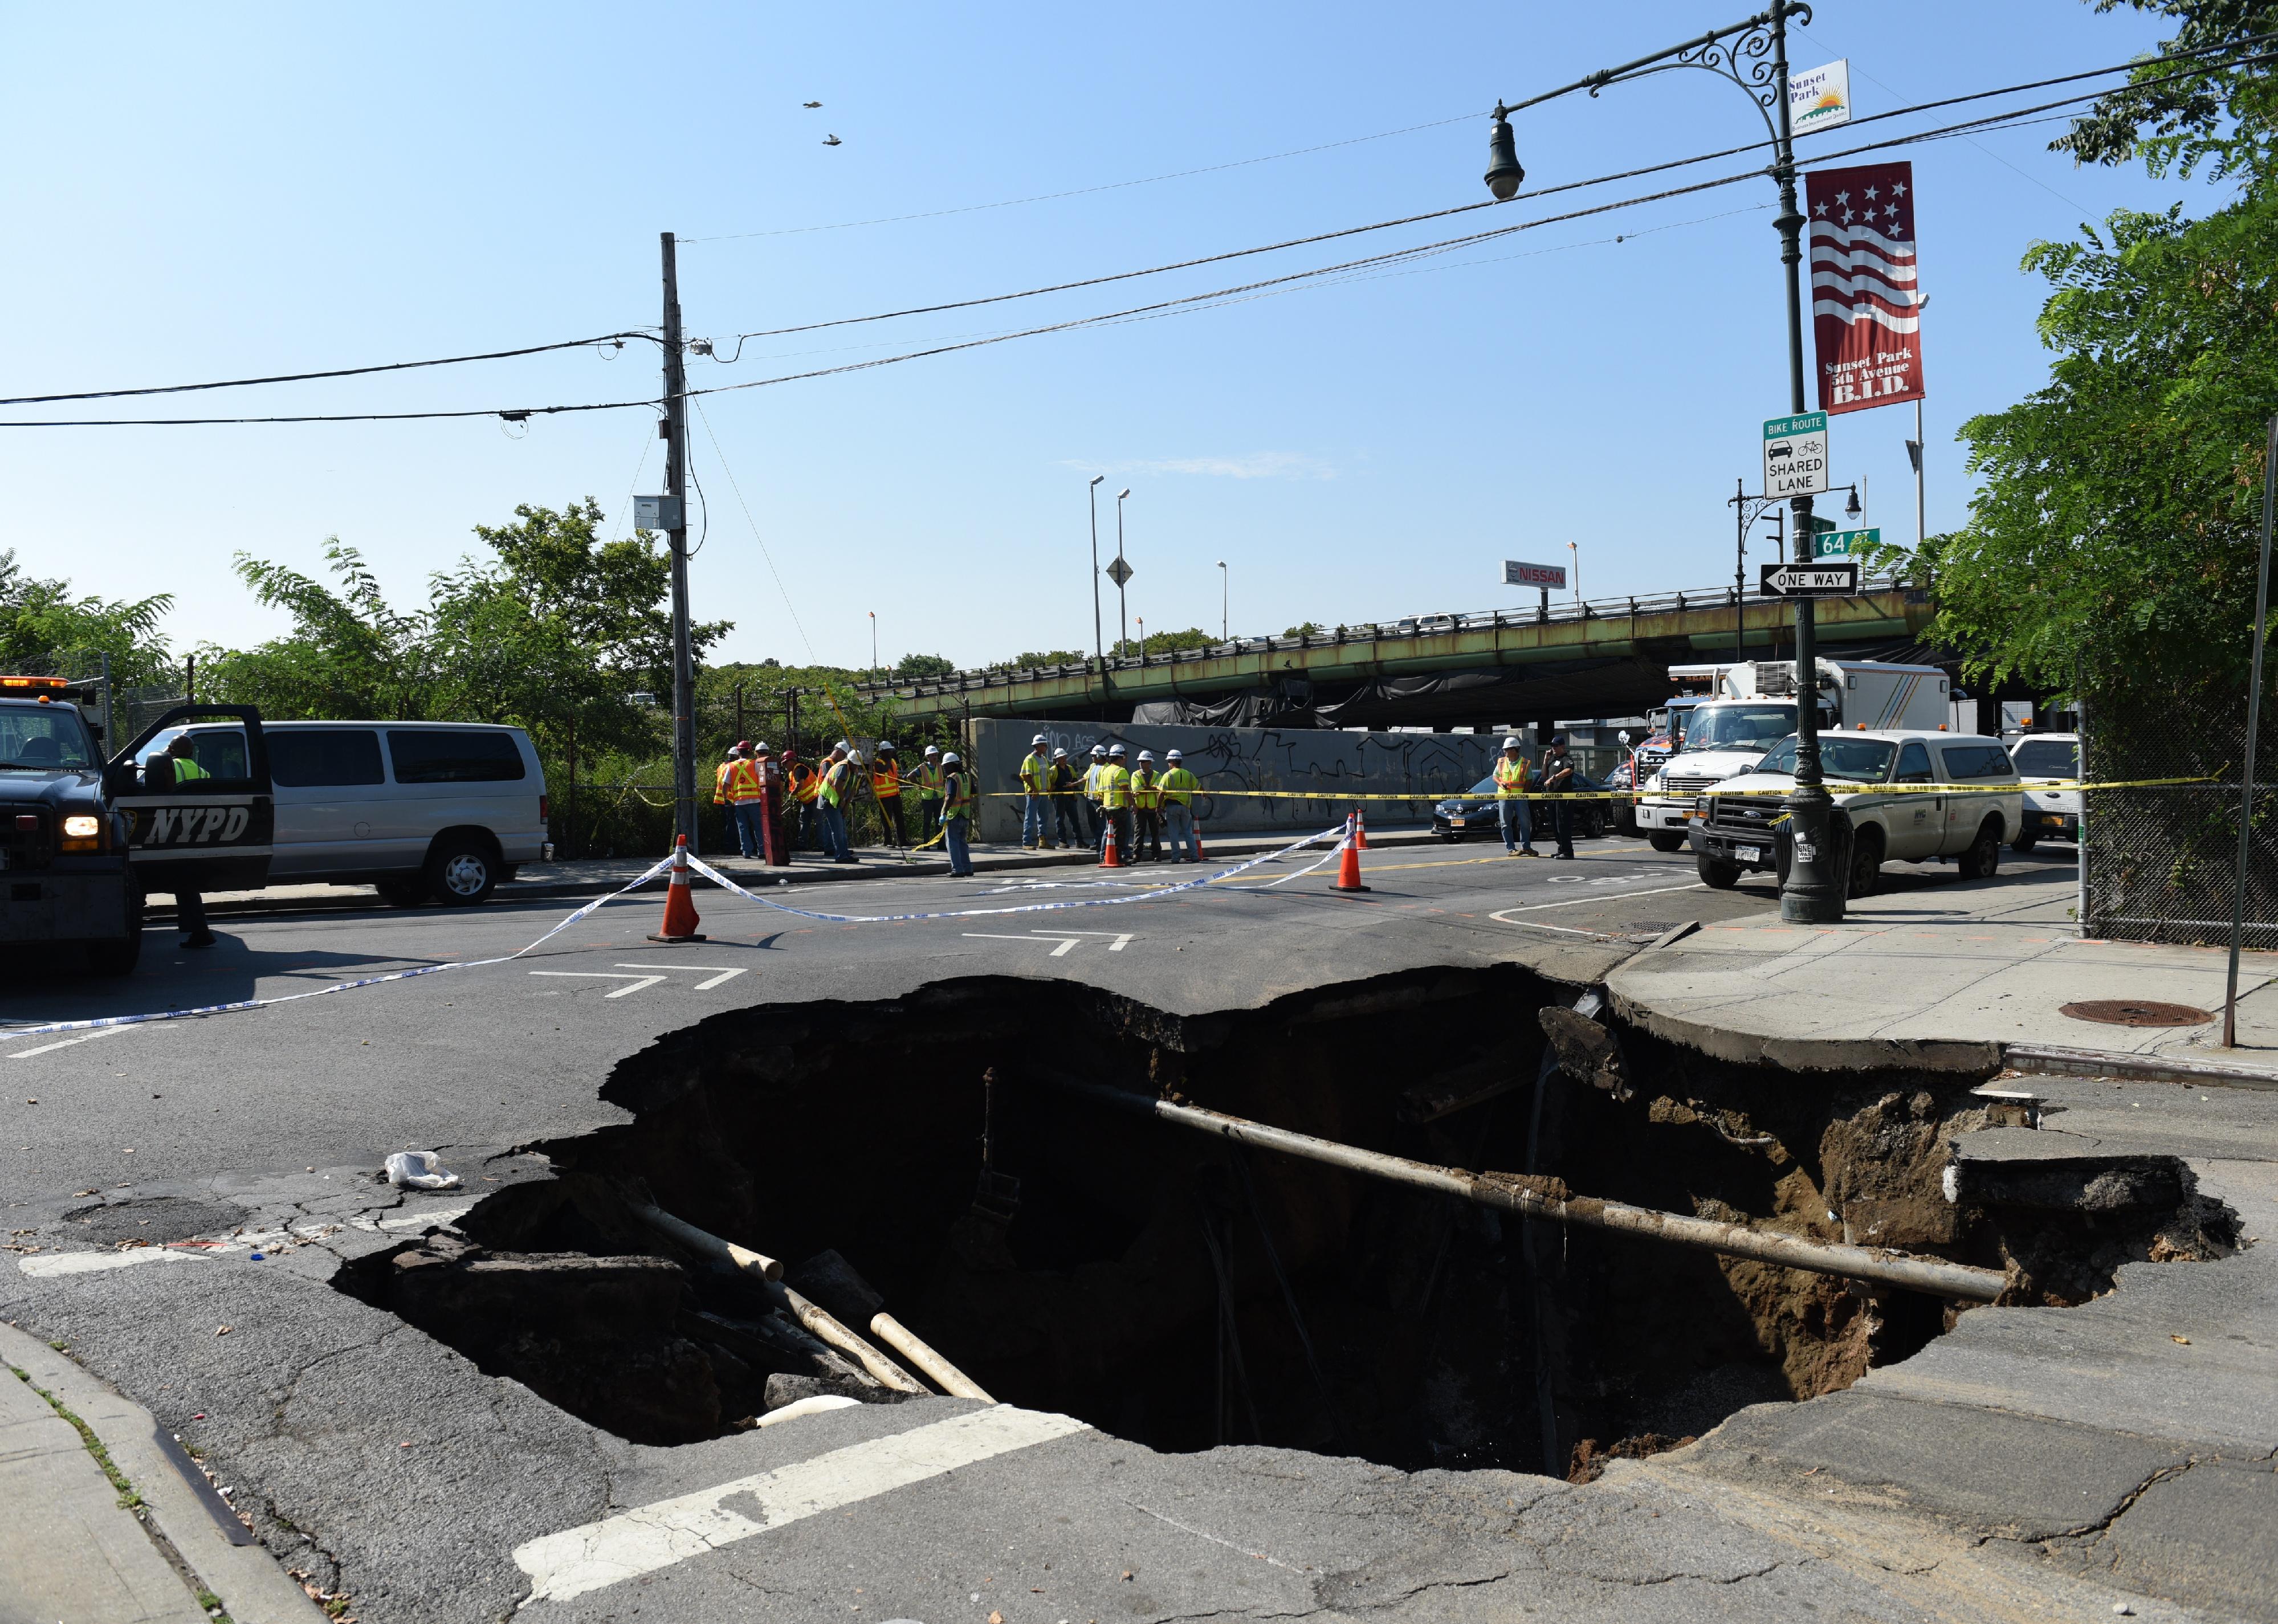 Large sinkhole erupted in the Sunset Park neighborhood of Brooklyn